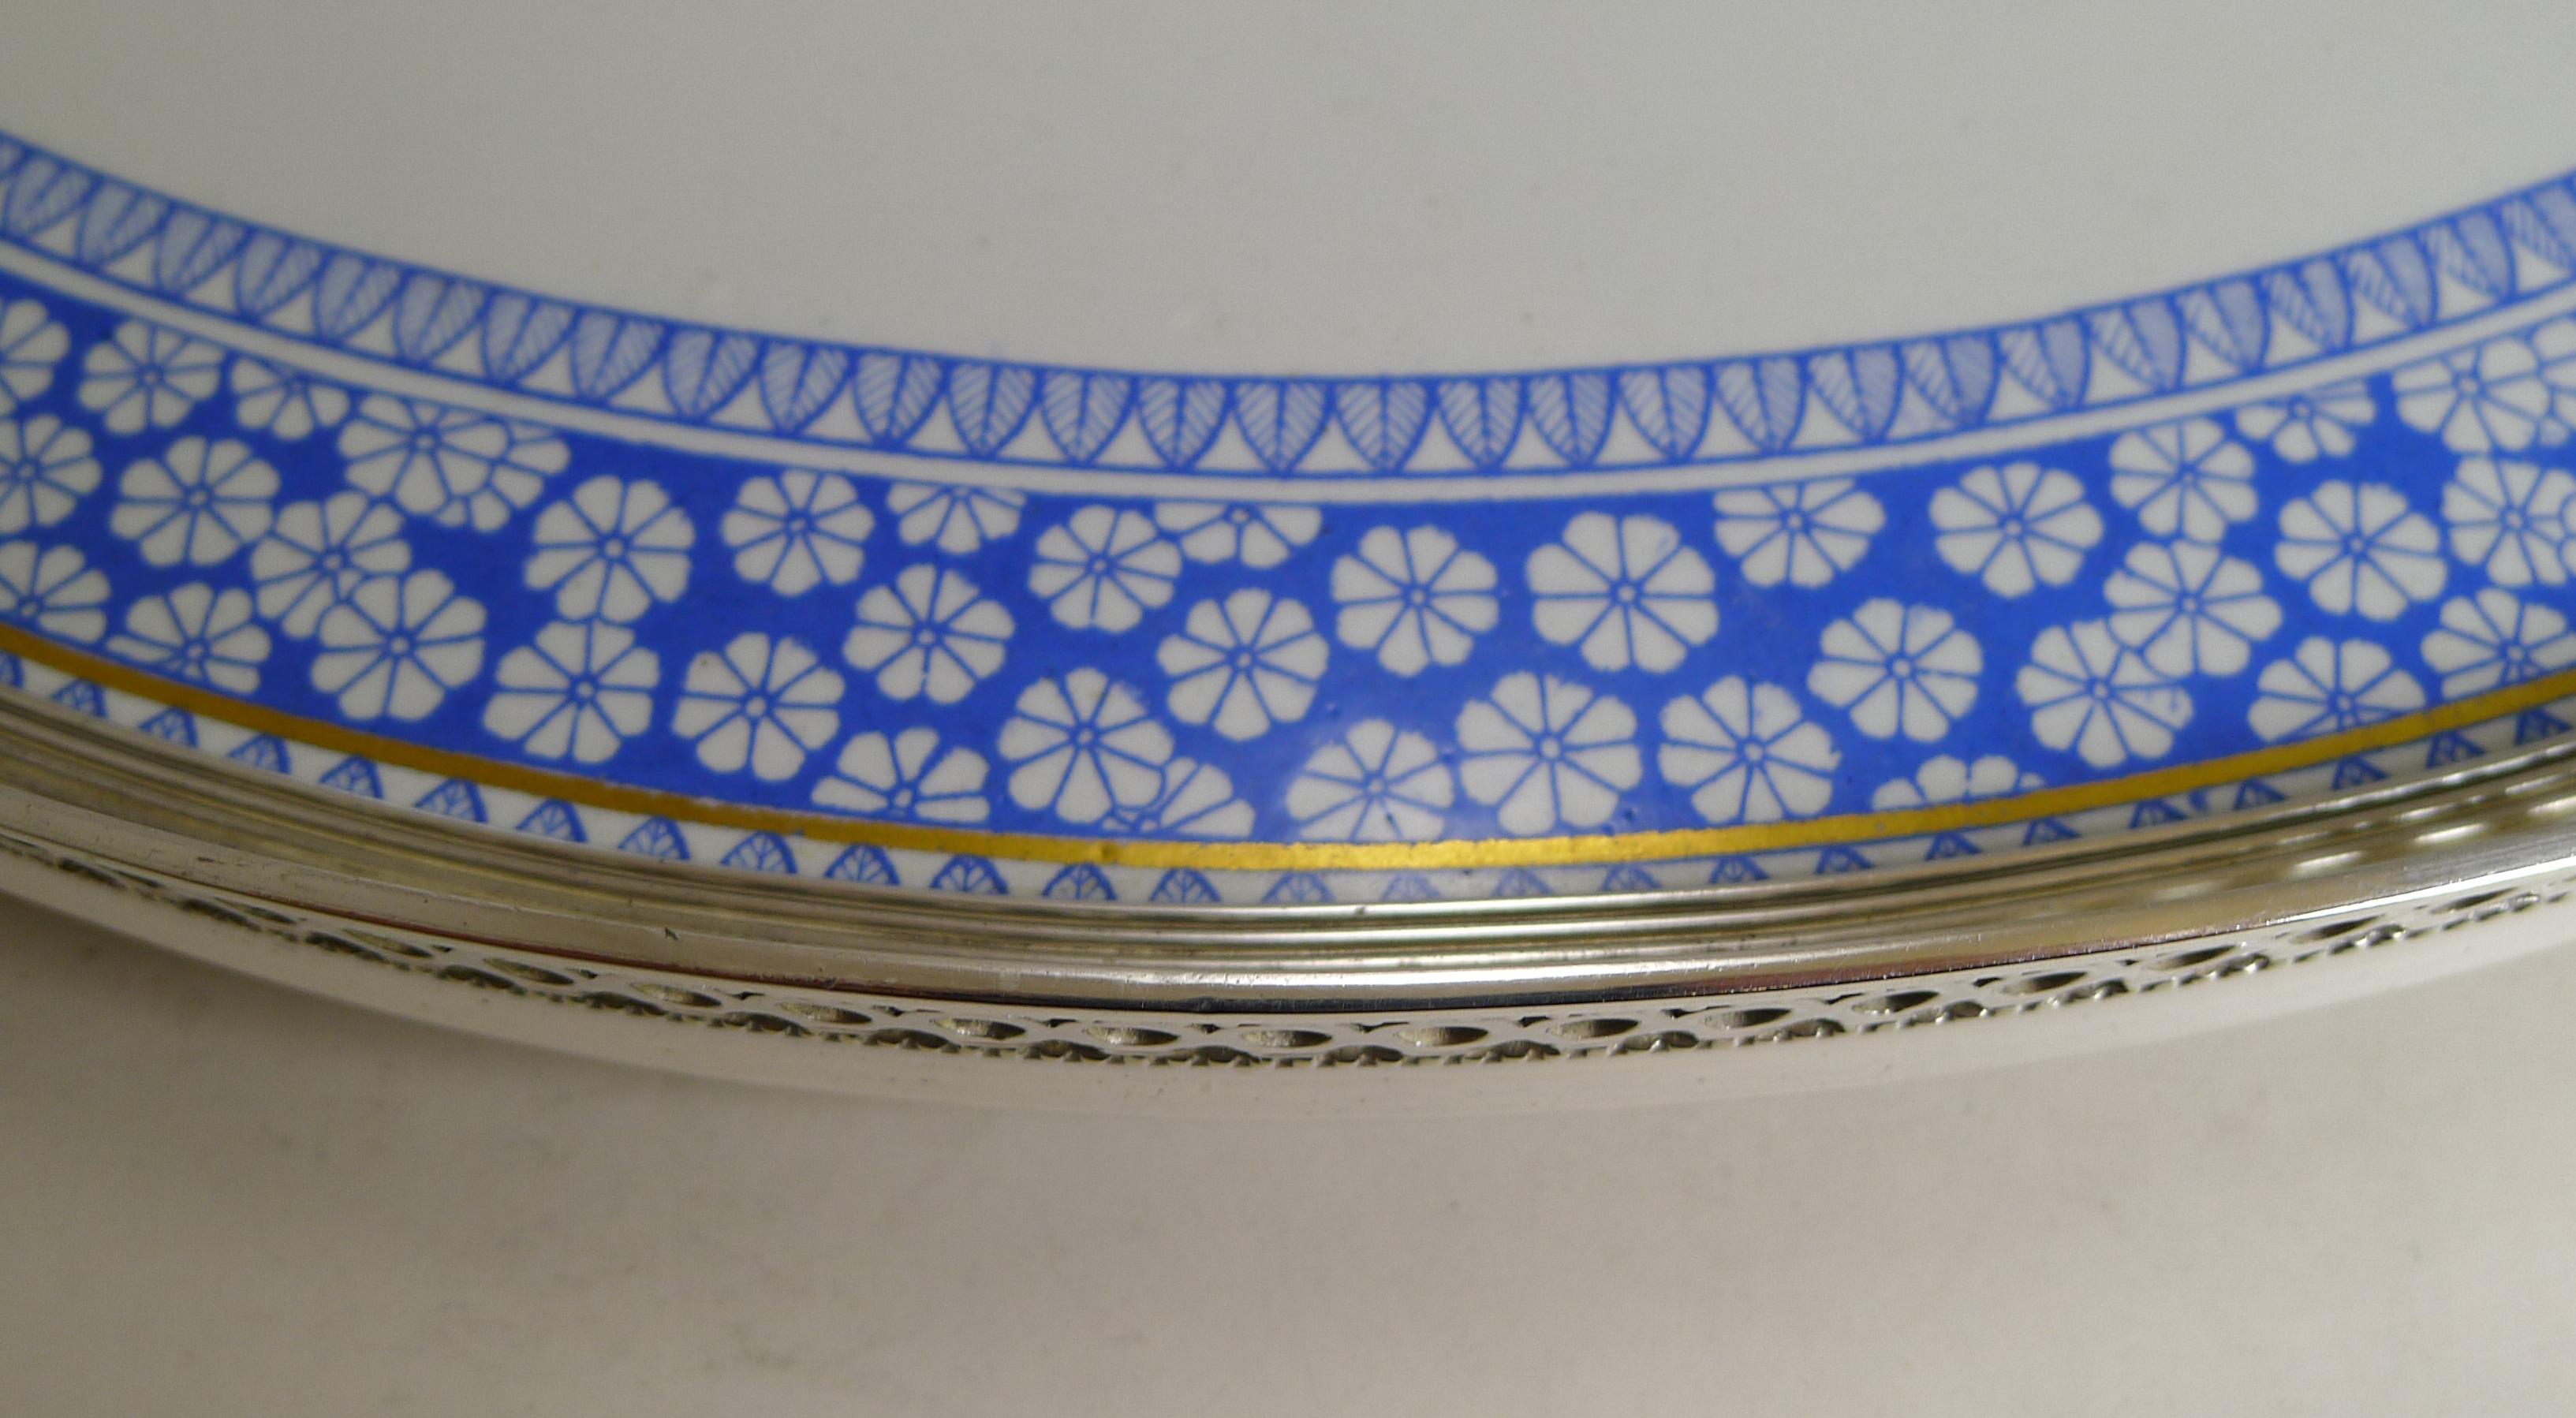 Late Victorian Antique English Silver Plate and Ceramic Blue and White Serving Tray, circa 1880